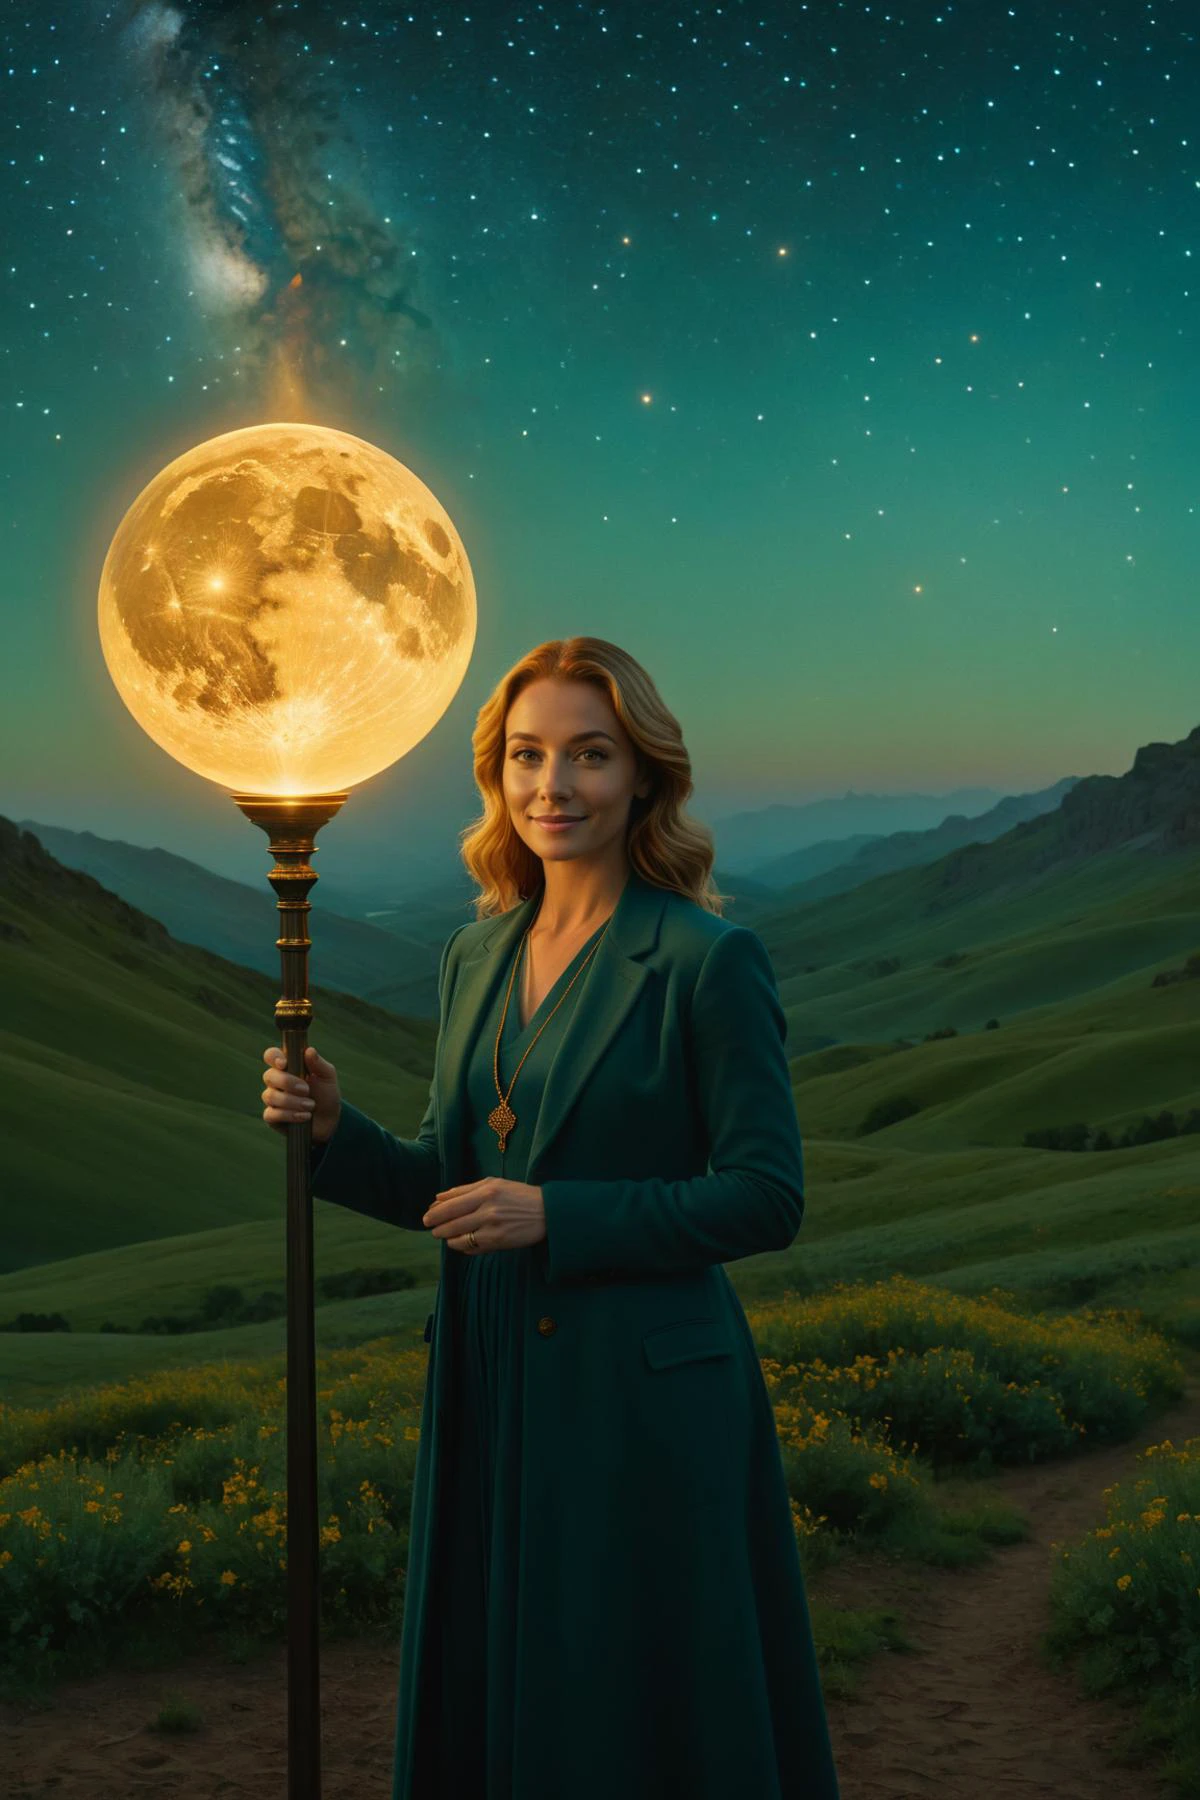 ,by Adam Elsheimer and Evgeny Lushpin in the style of Catherine Hyde and Kelly Mckernan,  movie still, film still, cinematic, cinematic shot, cinematic lighting (polaroid film photography:0.000), professional studio photo sorcerous, fancy, alchemical, reverie 